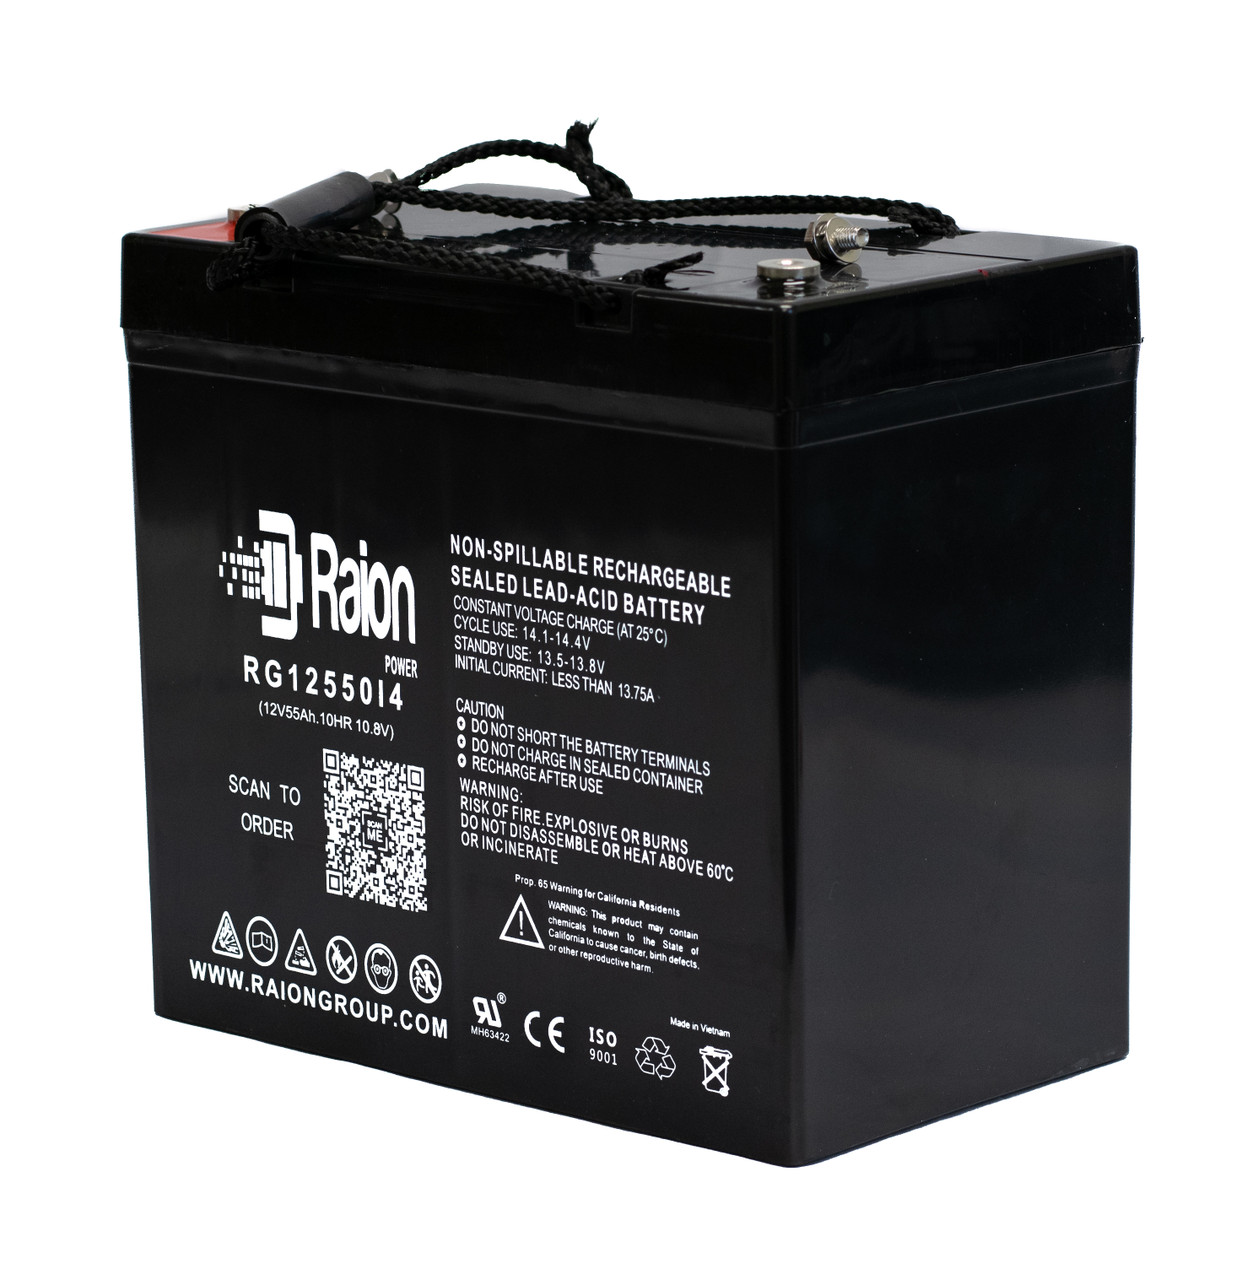 Raion Power 12V 55Ah 22NF Mobility Scooter Battery Replacement for Balder Liberty